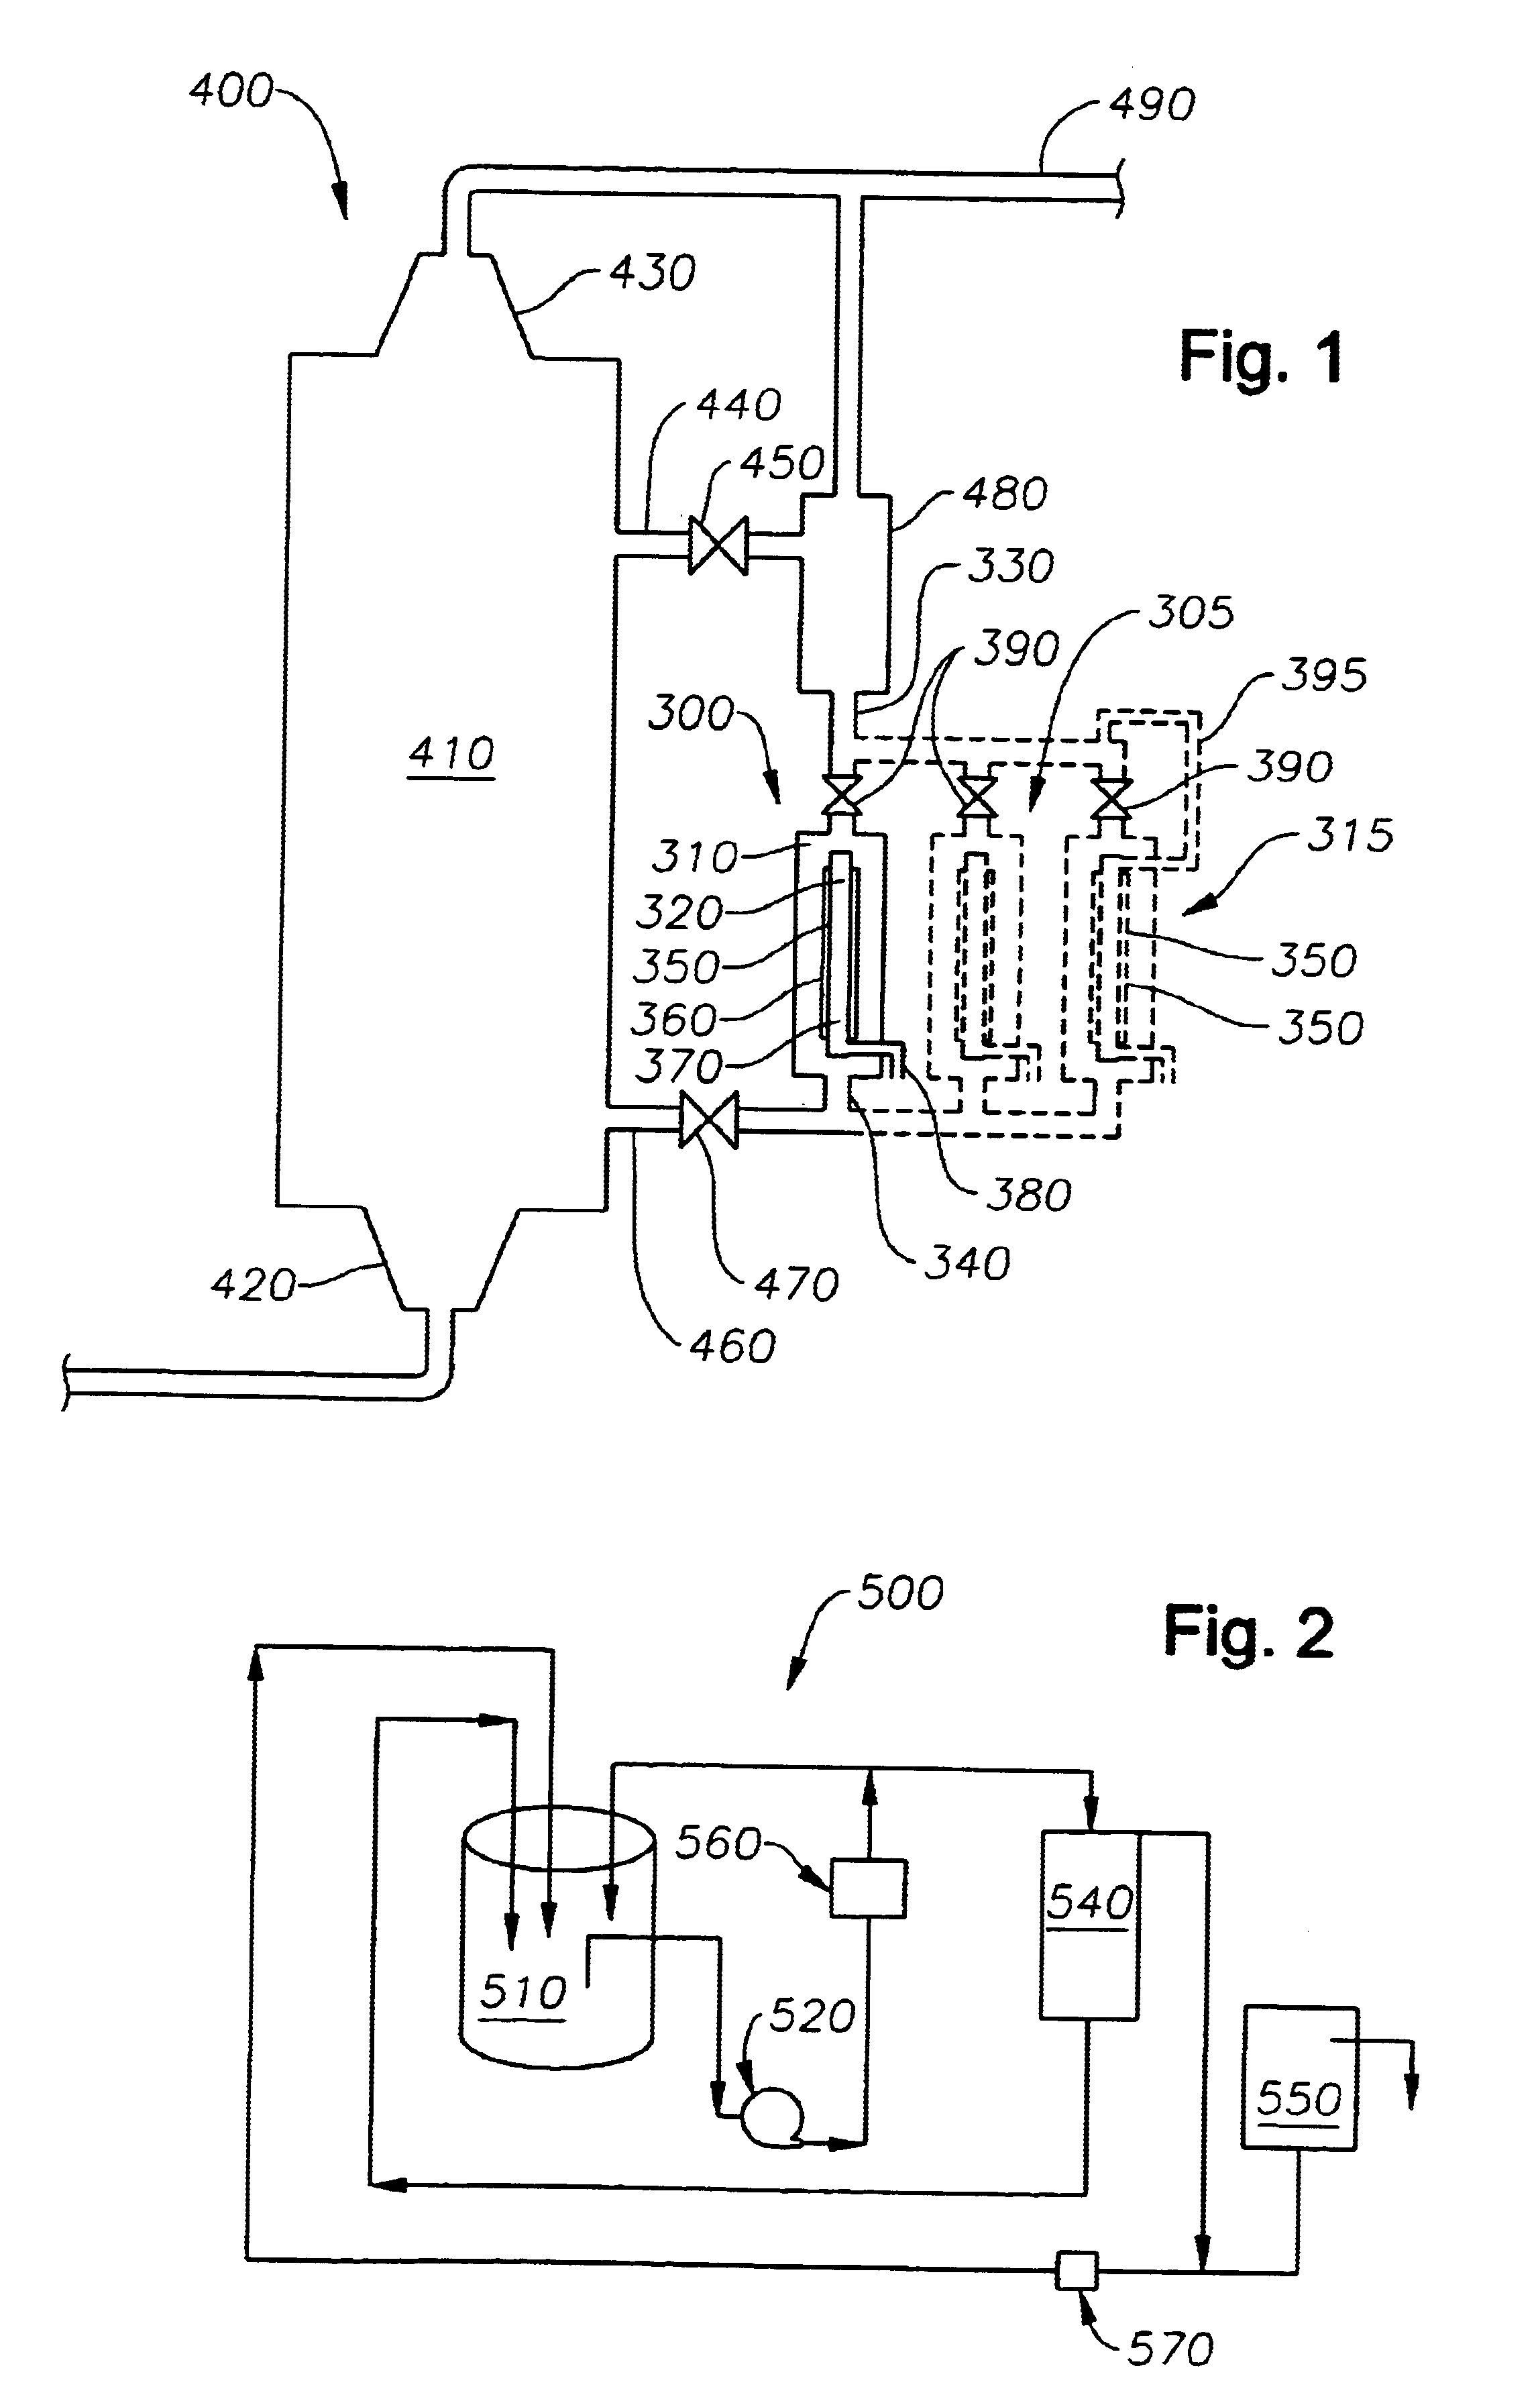 Optimized solid/liquid separation system for multiphase converters